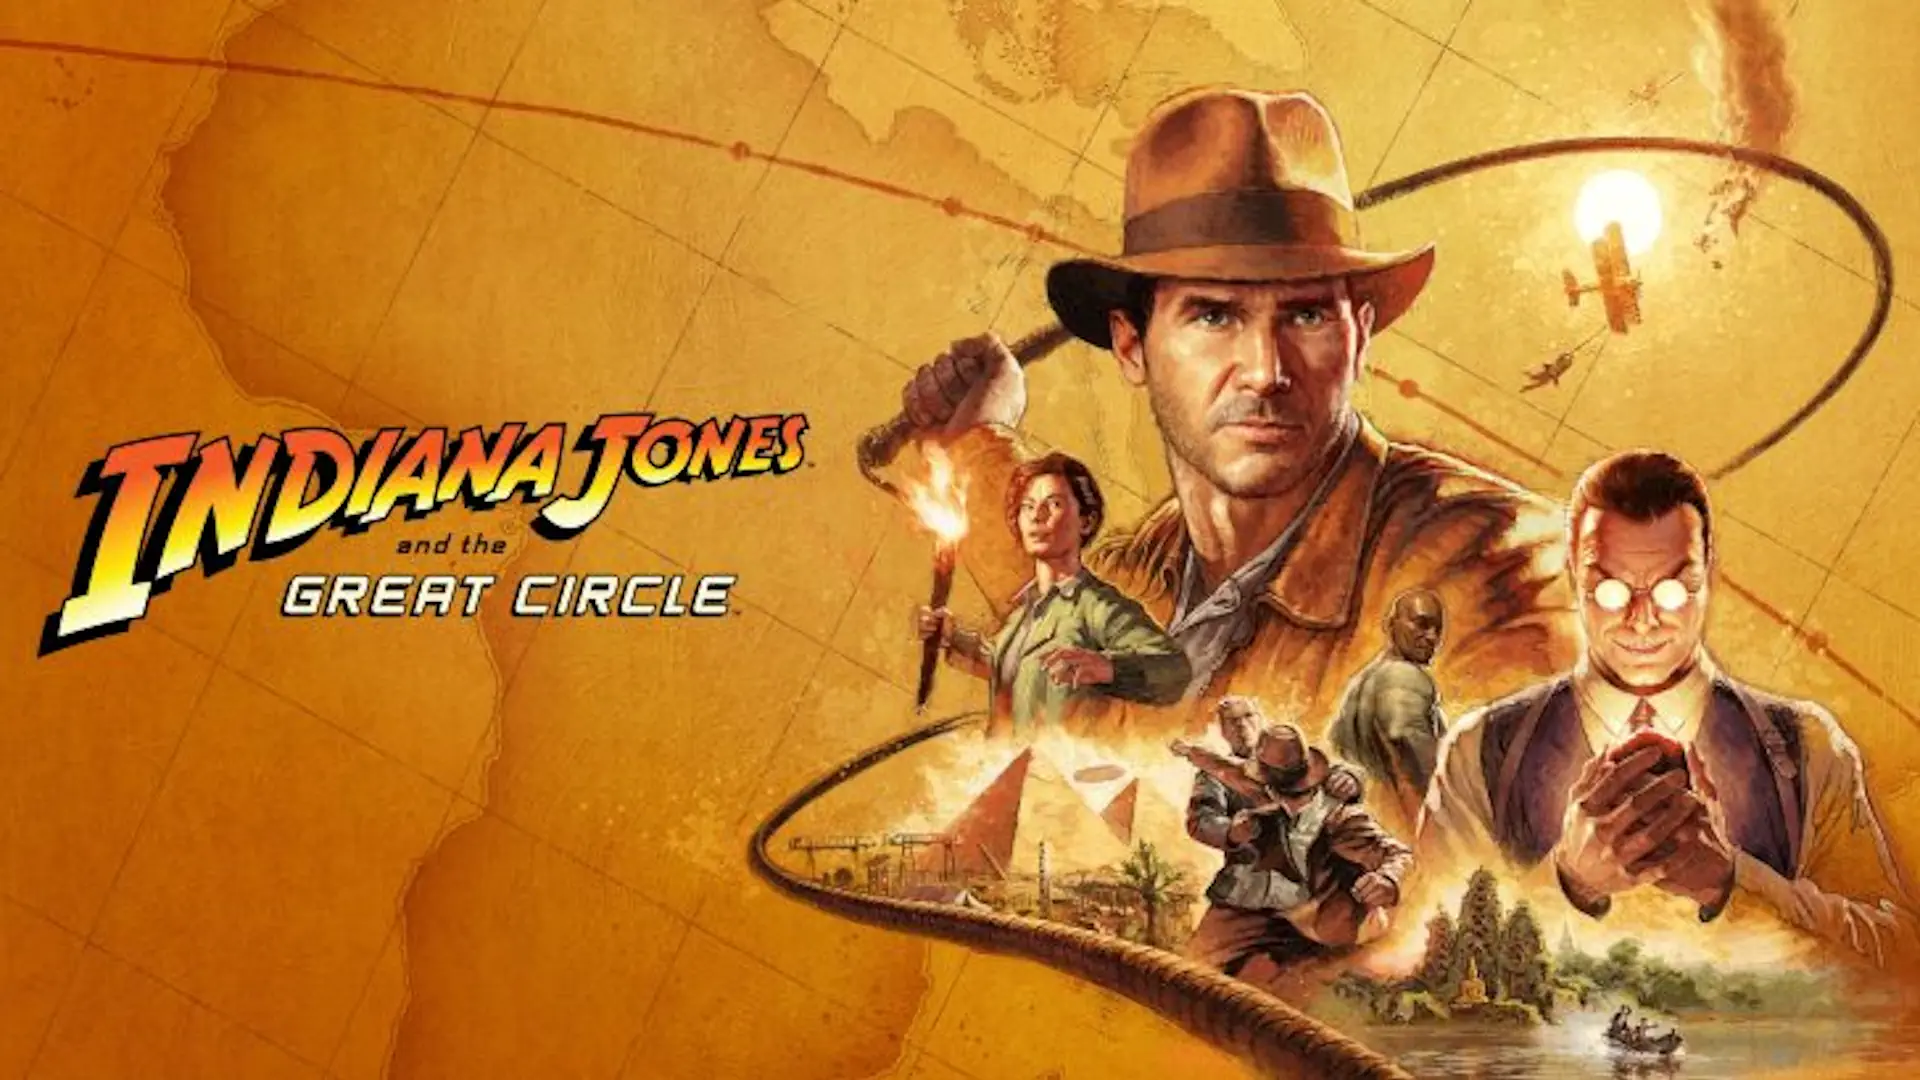 In addition to the Xbox, the upcoming Indiana Jones gaming treat may also be coming to the PS5